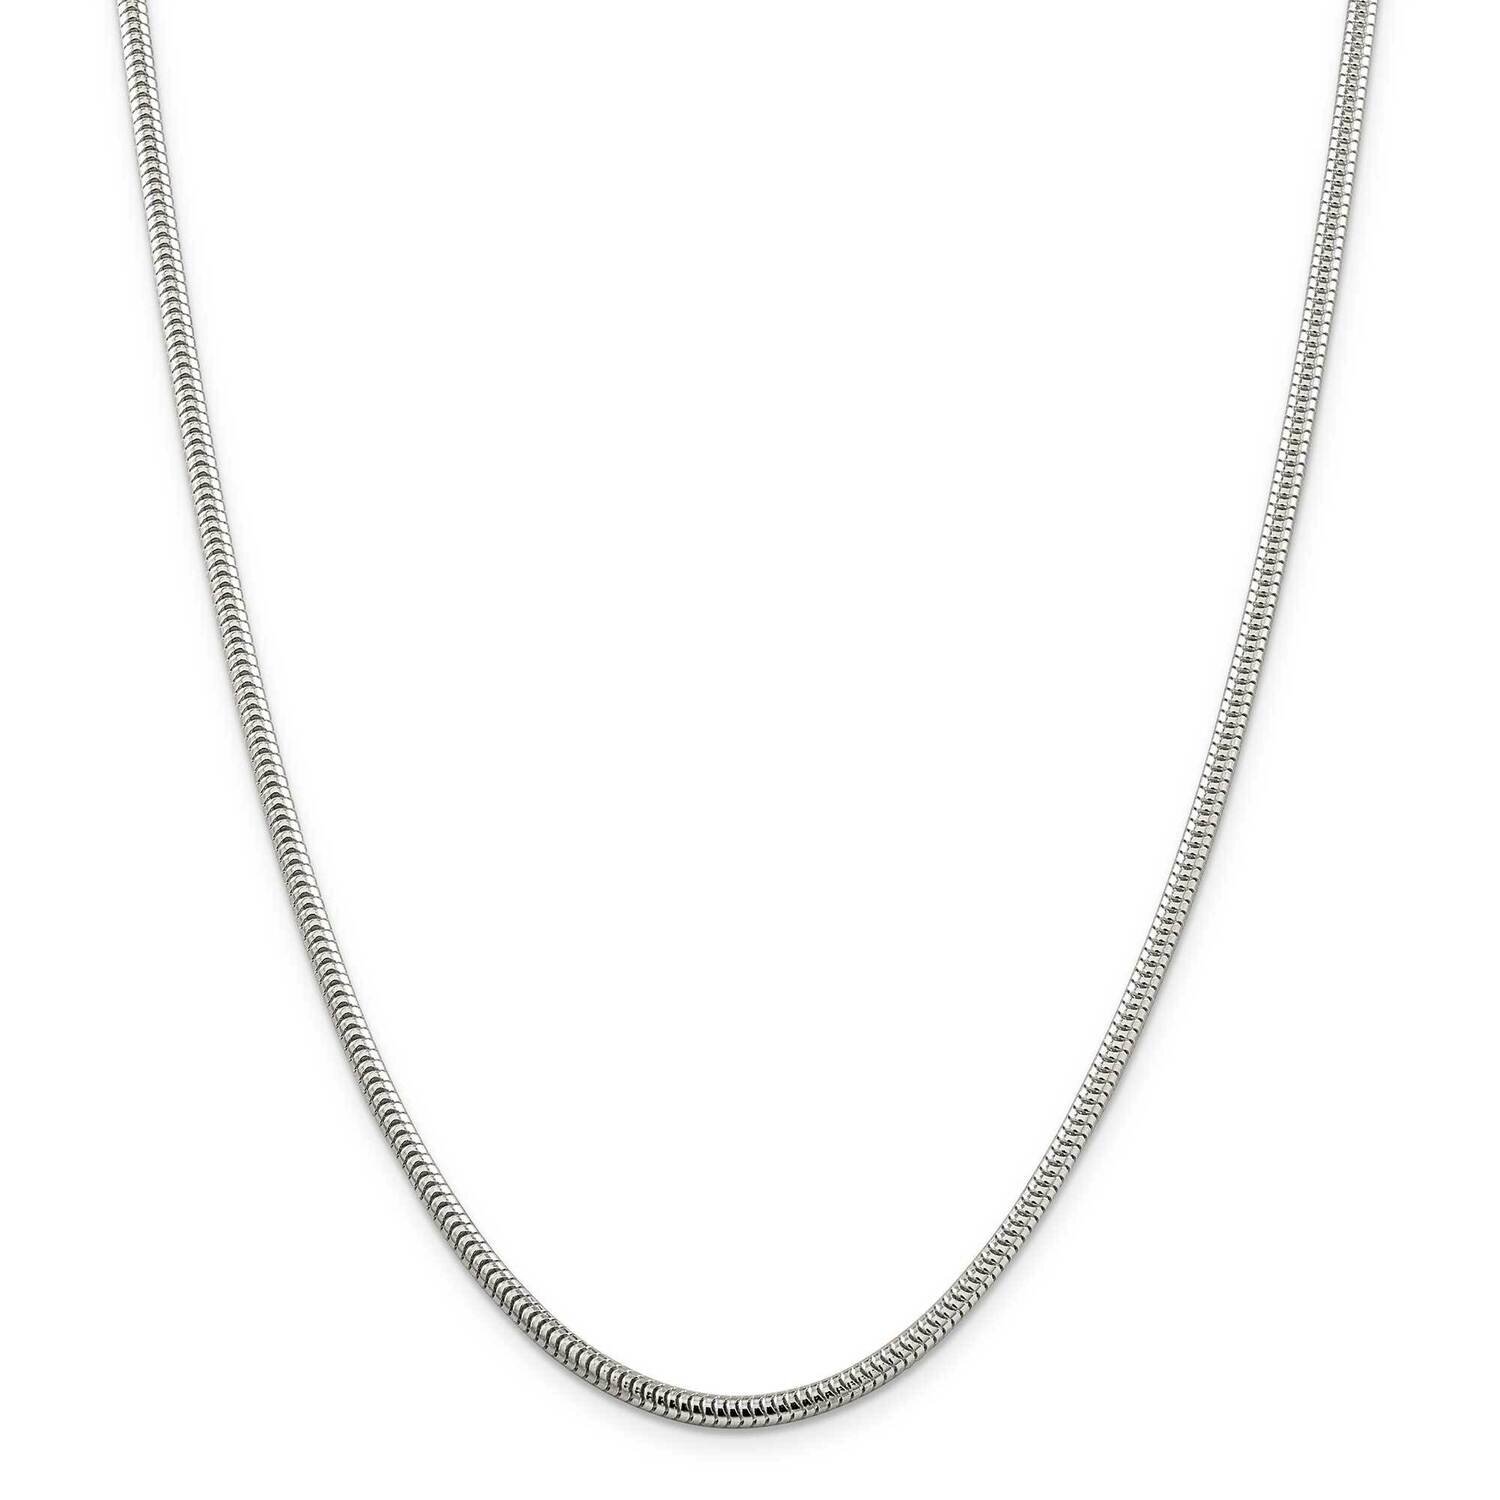 3mm Round Snake Chain 22 Inch Sterling Silver QSNL080-22